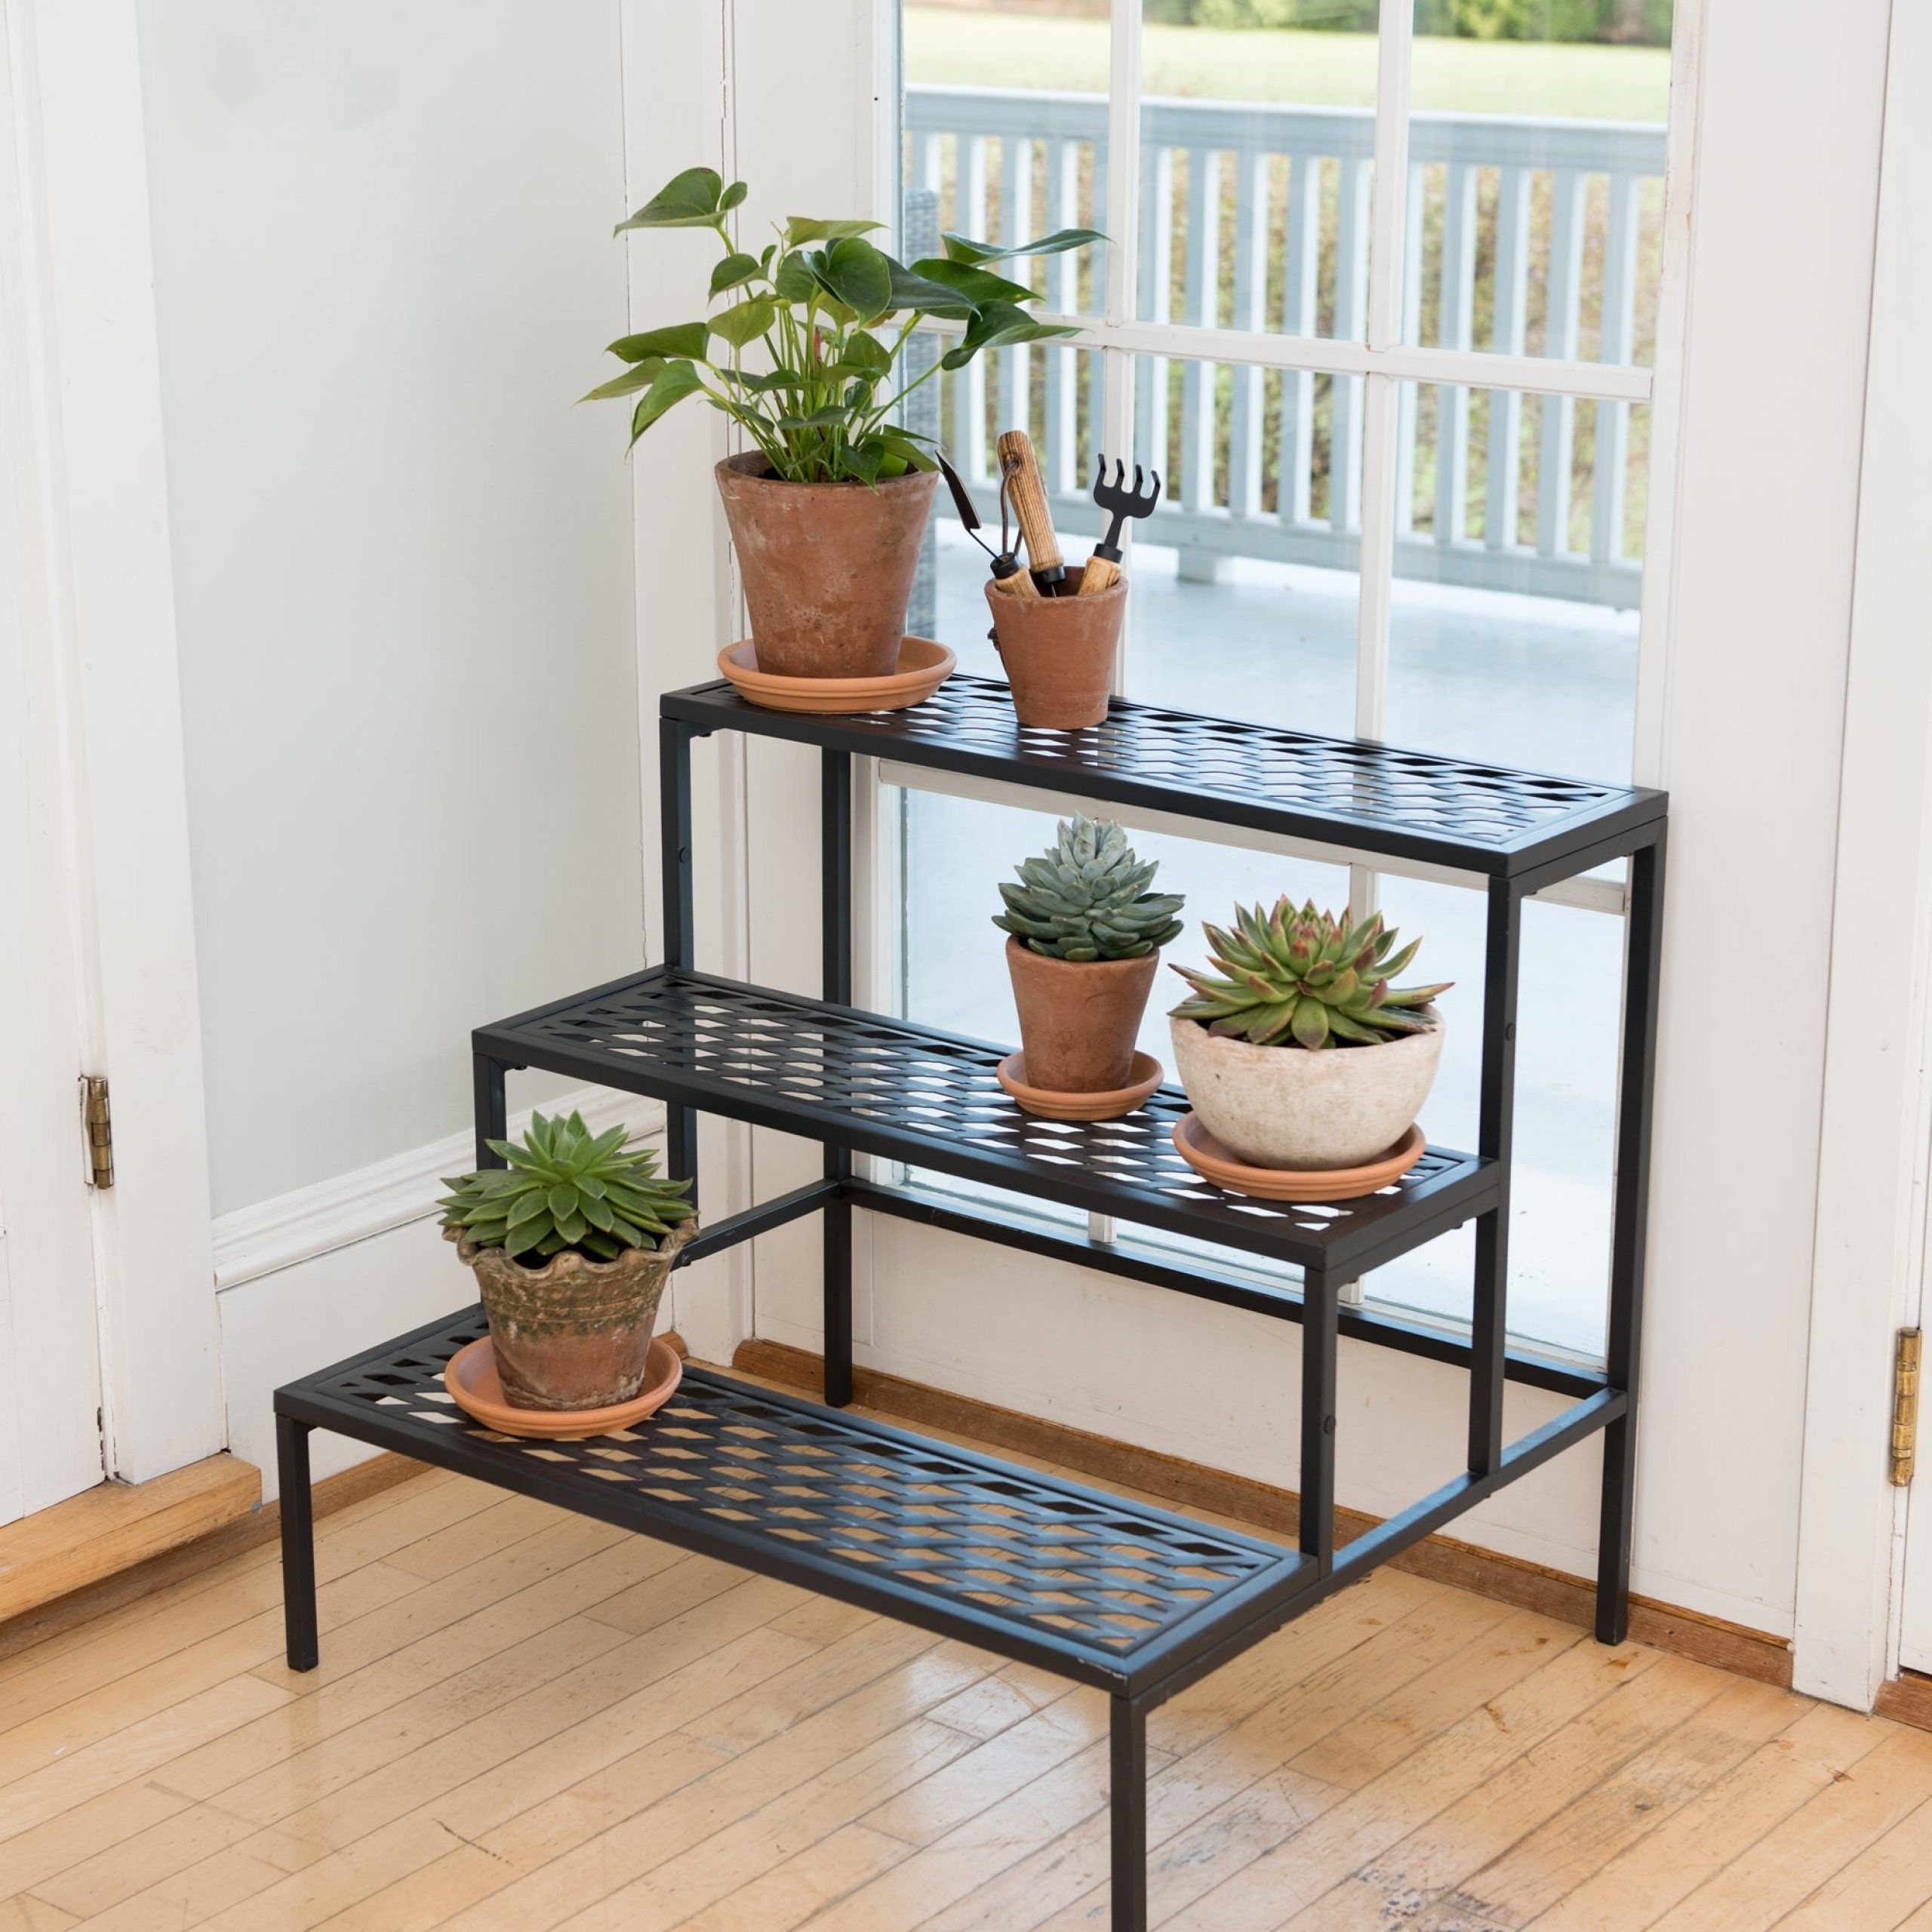 Lattice Multi Tiered Plant Stand – Black (View 8 of 10)